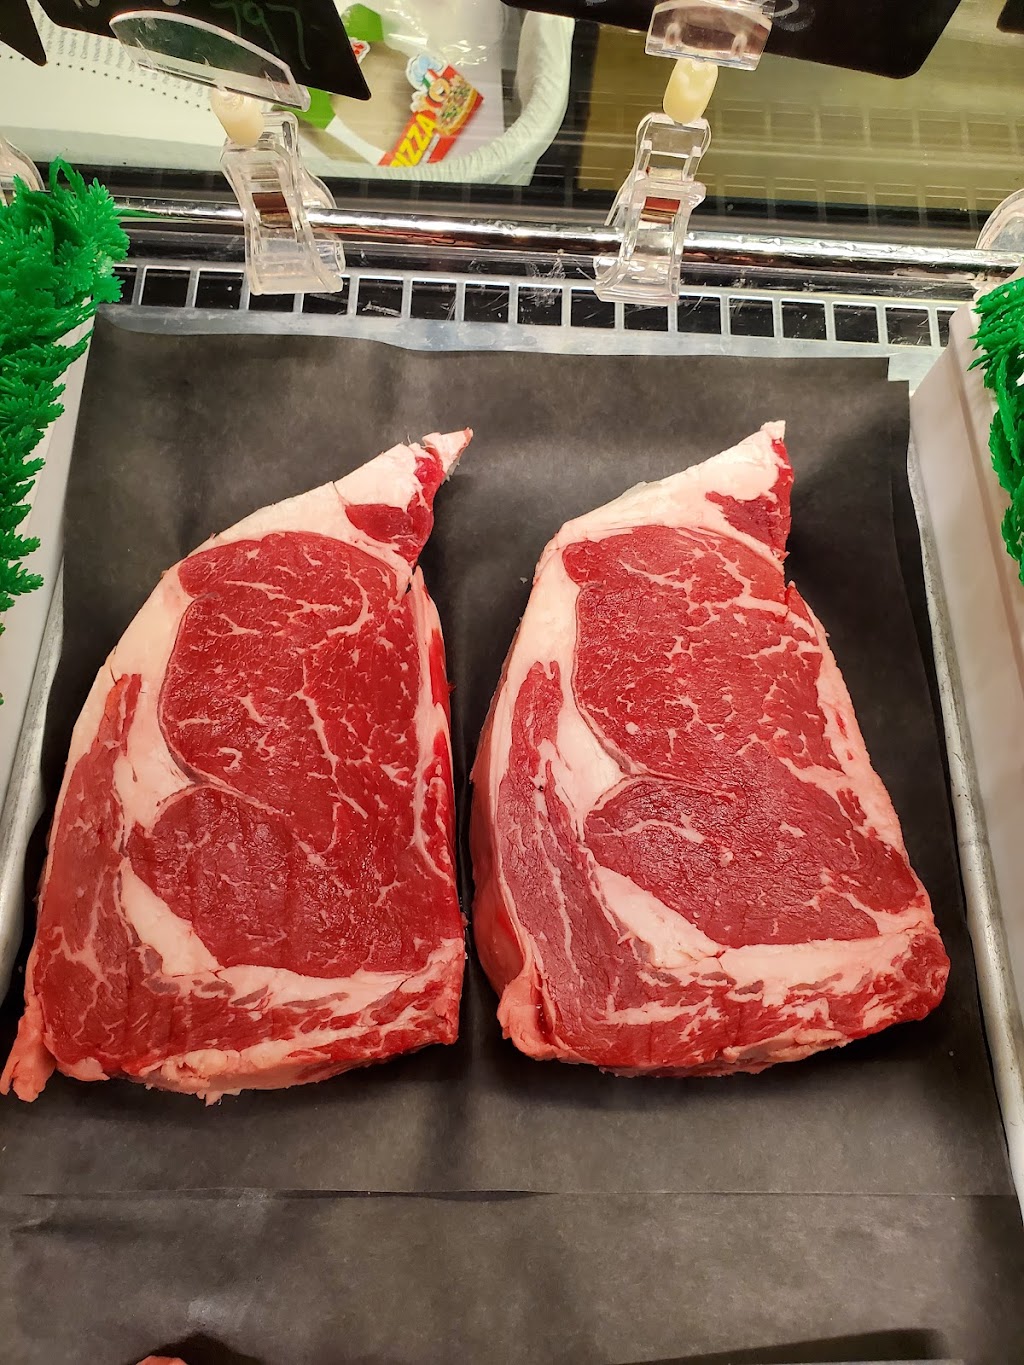 Twin R Quality Meats | 113 N Main St, Christiansburg, OH 45389 | Phone: (937) 857-9273